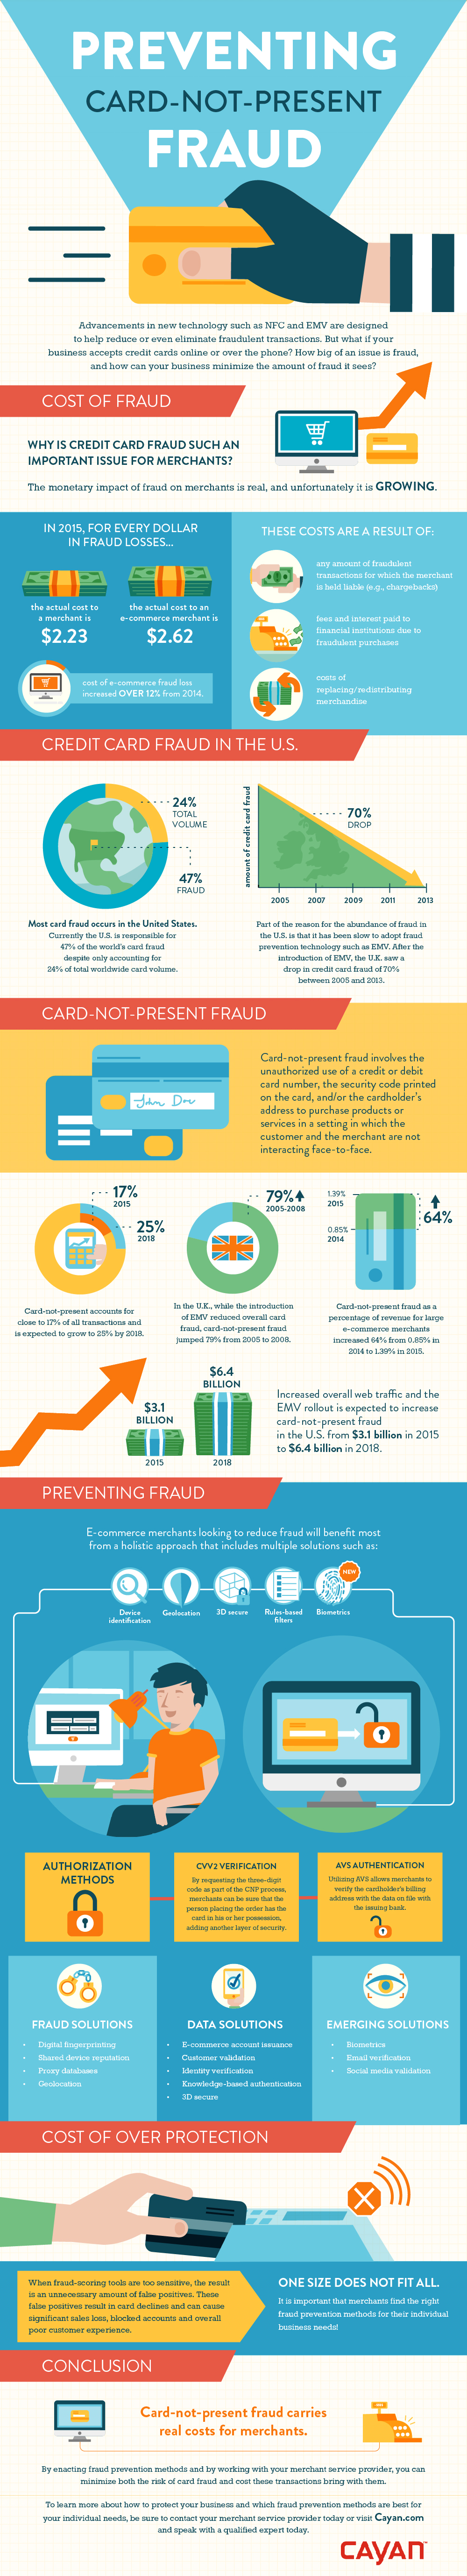 Preventing Card-Not-Present Fraud